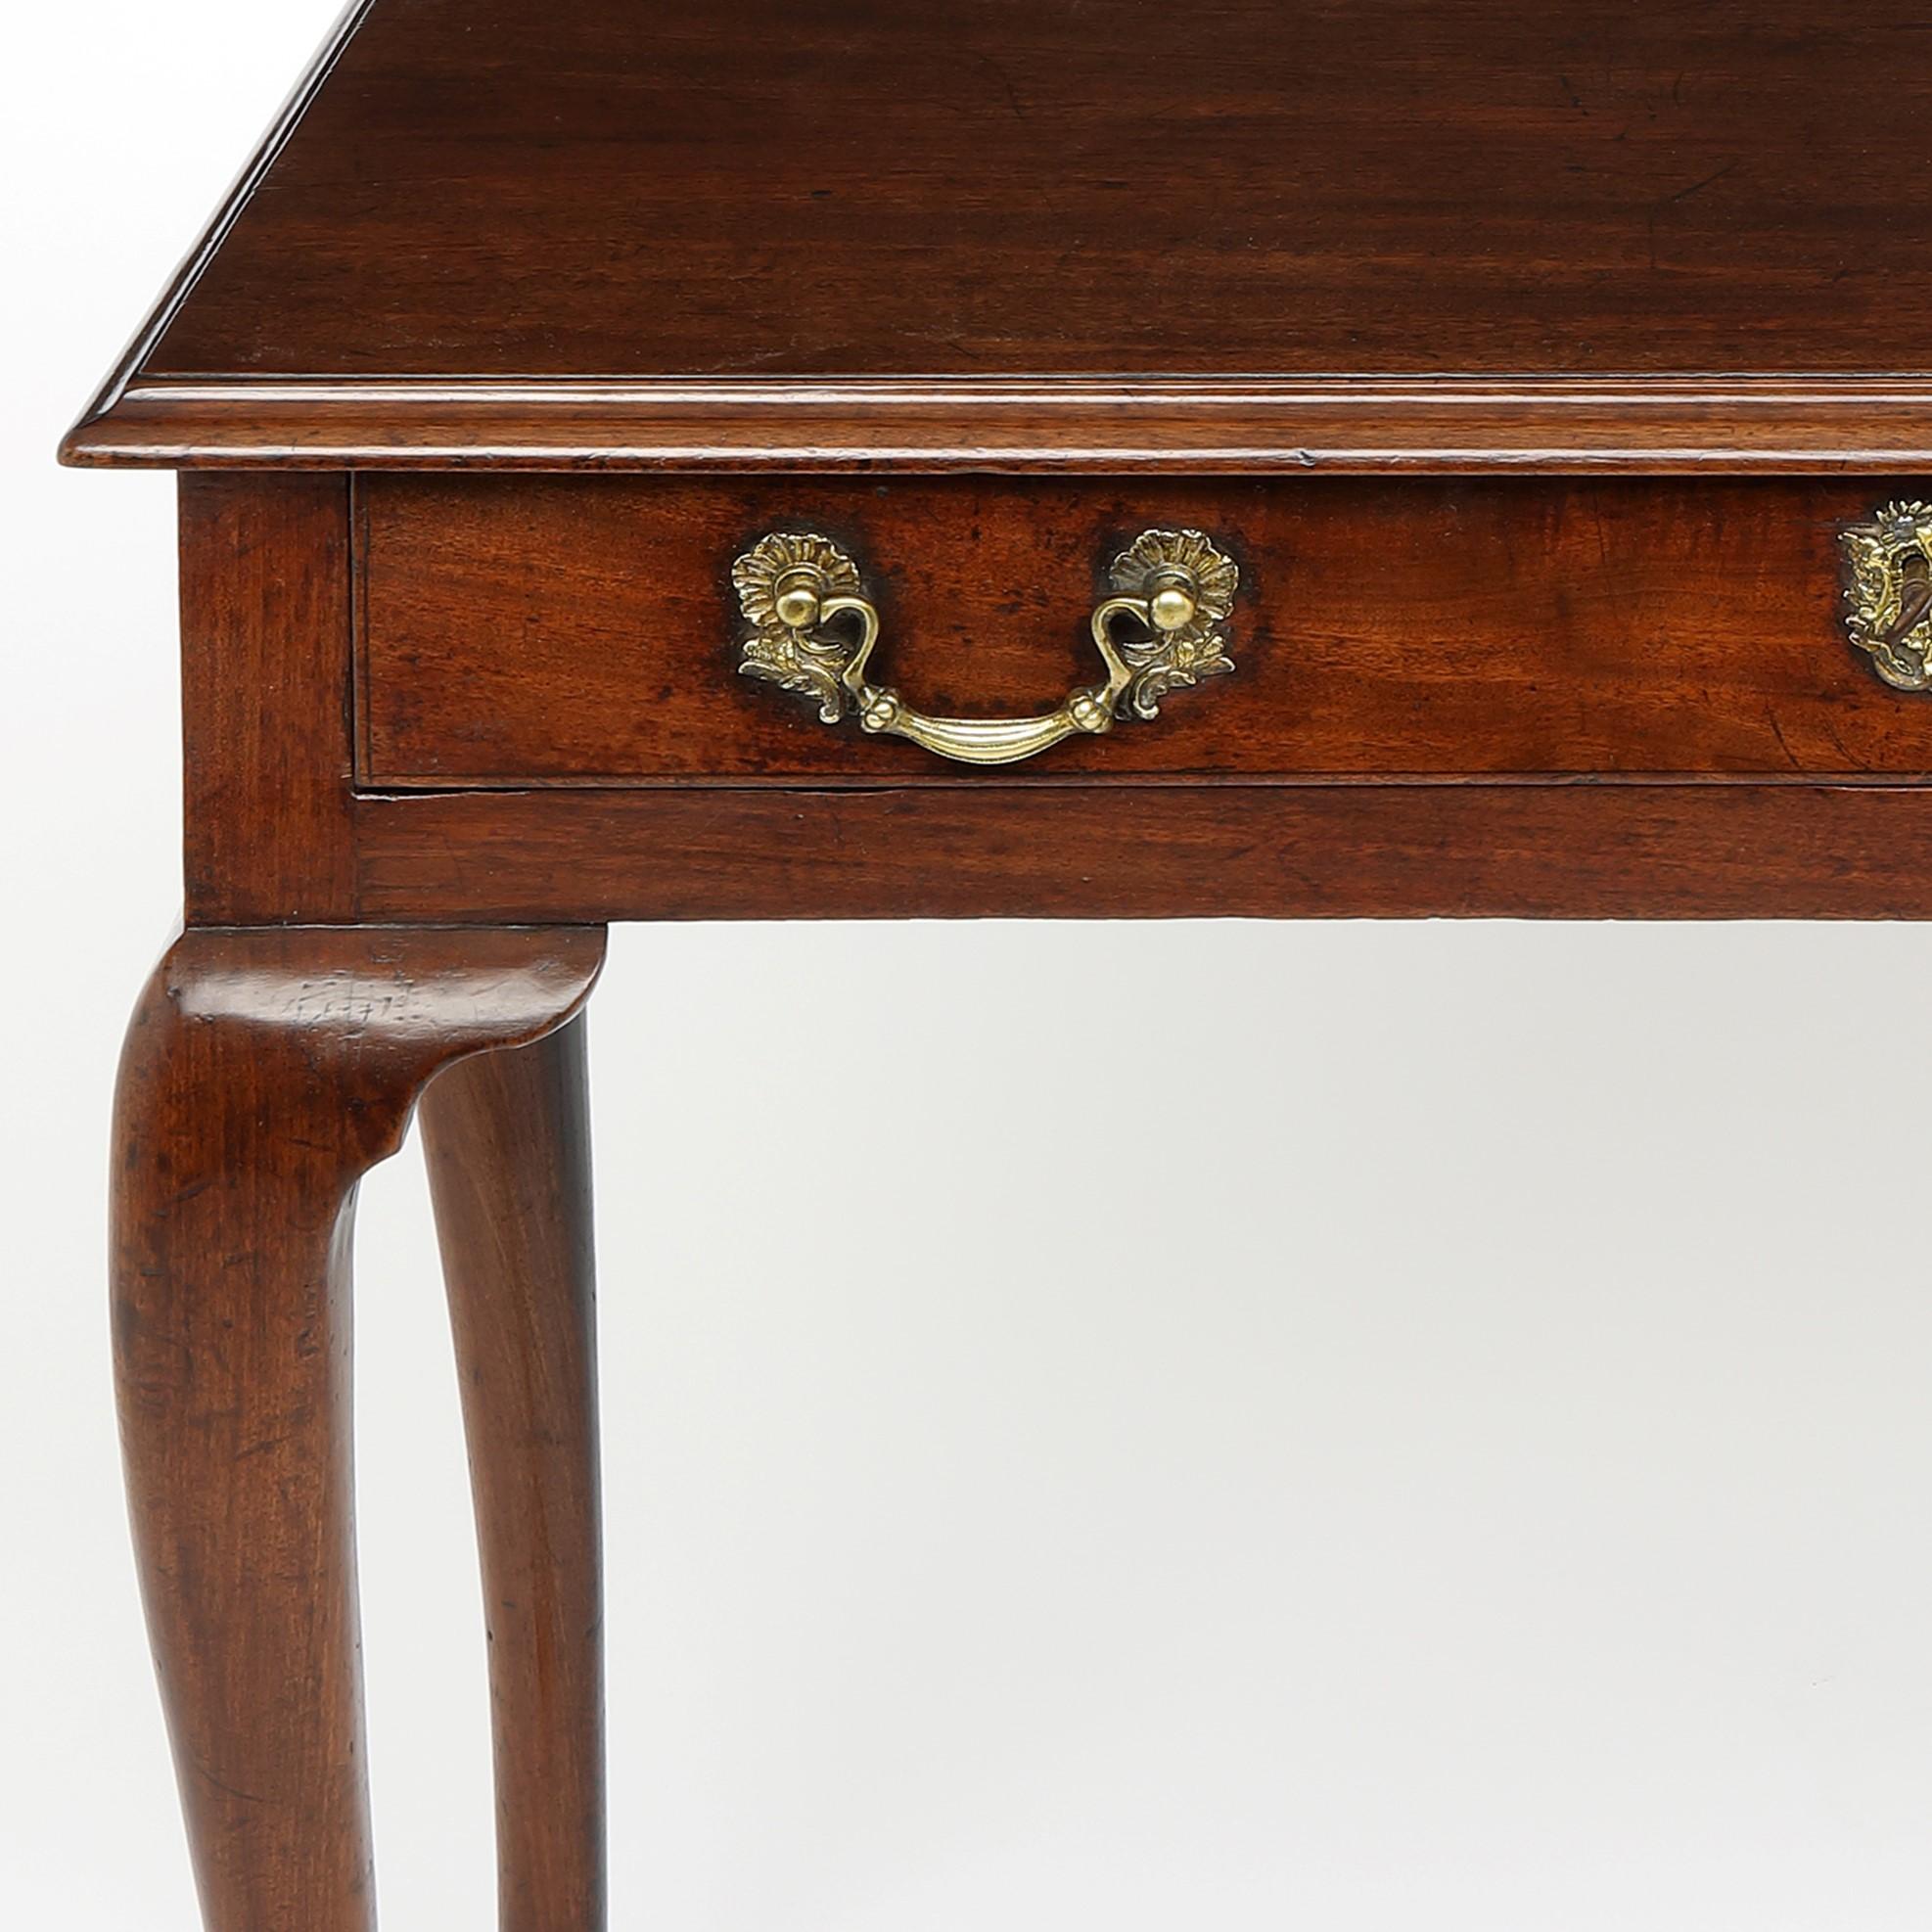 European Mid 18th Century Mahogany Side Table For Sale